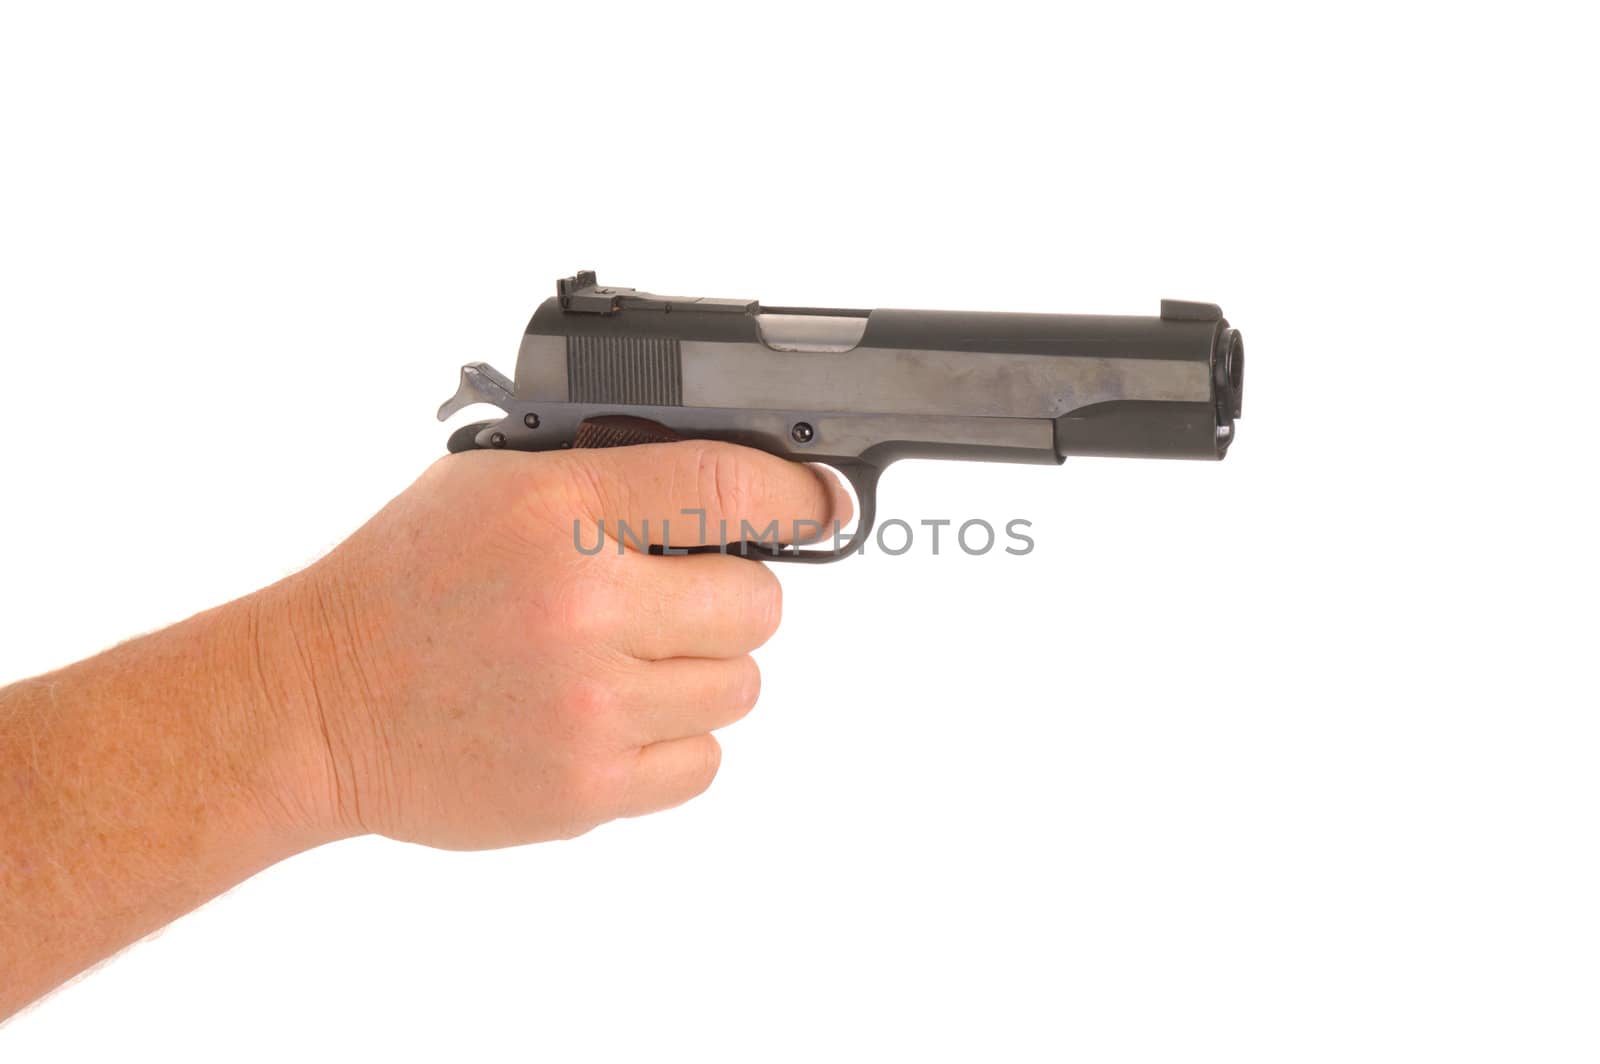 hand holding semi-automatic pistol cocked ready to fire, isolated on white